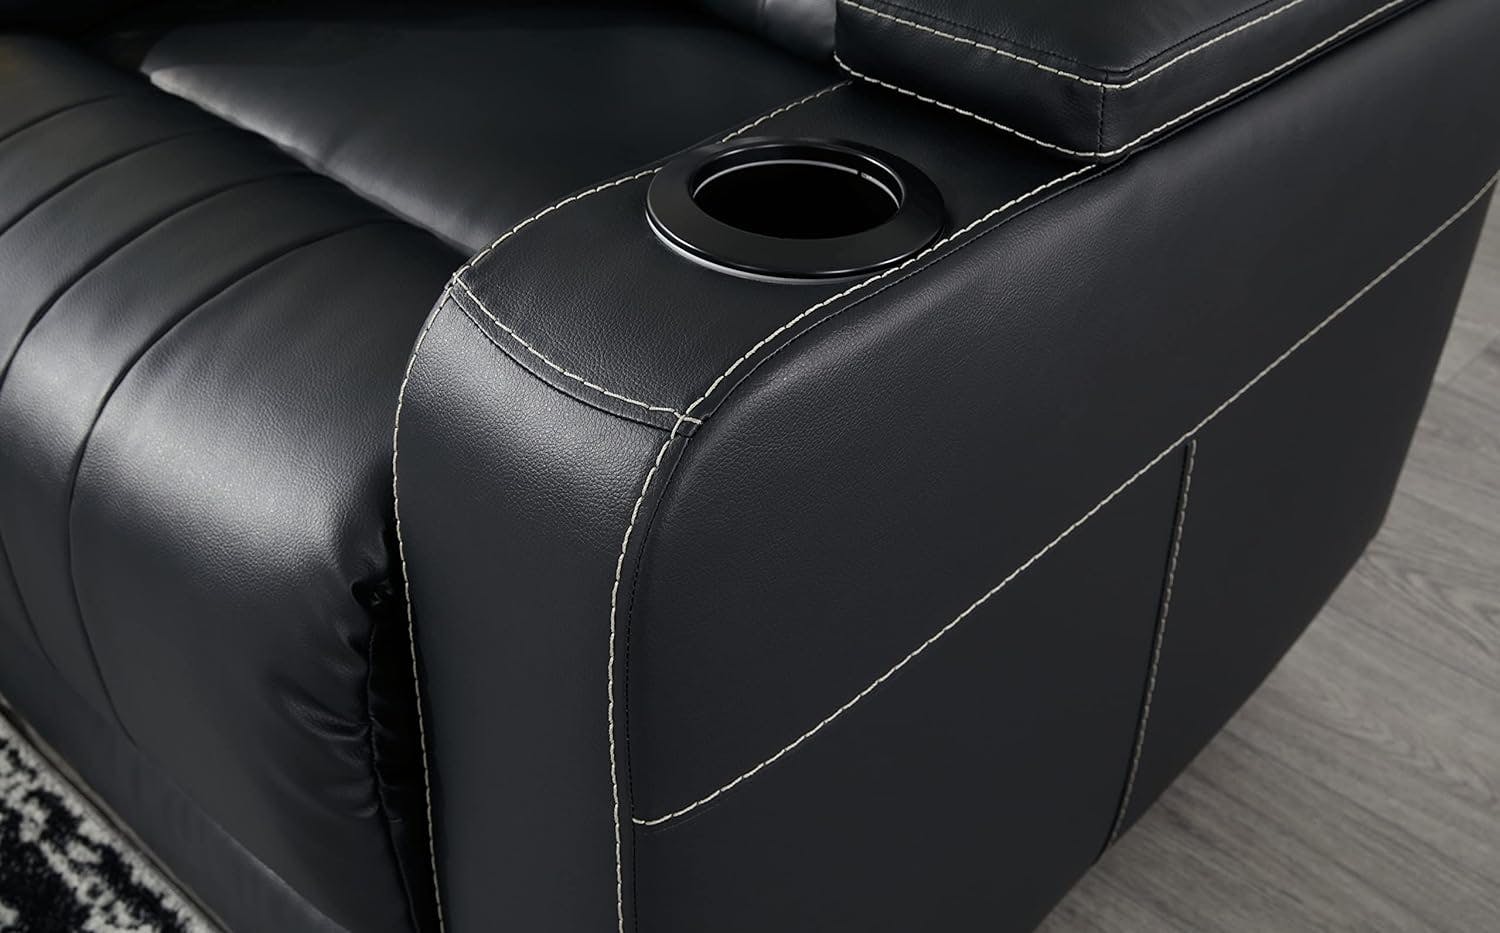 Contemporary Black Faux Leather LED Recliner 36"x41"x44"